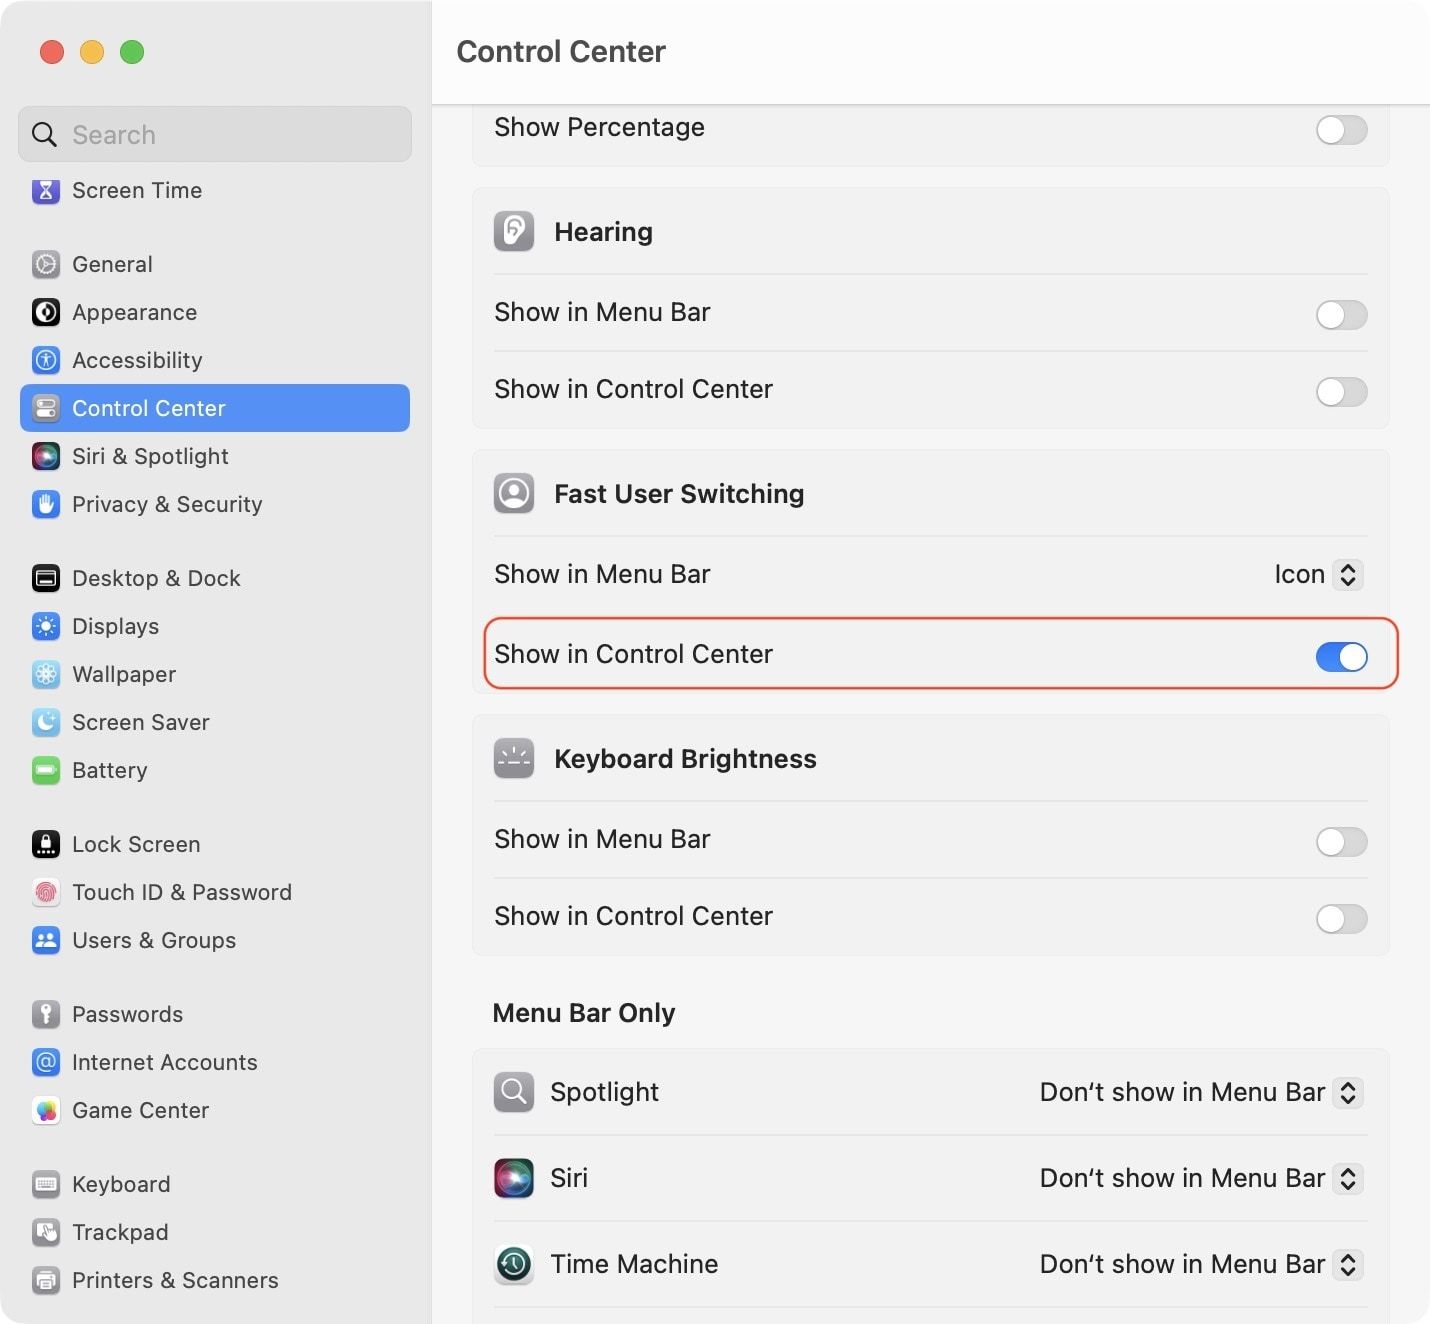 Enable toggle for Fast User Switching in Control Center